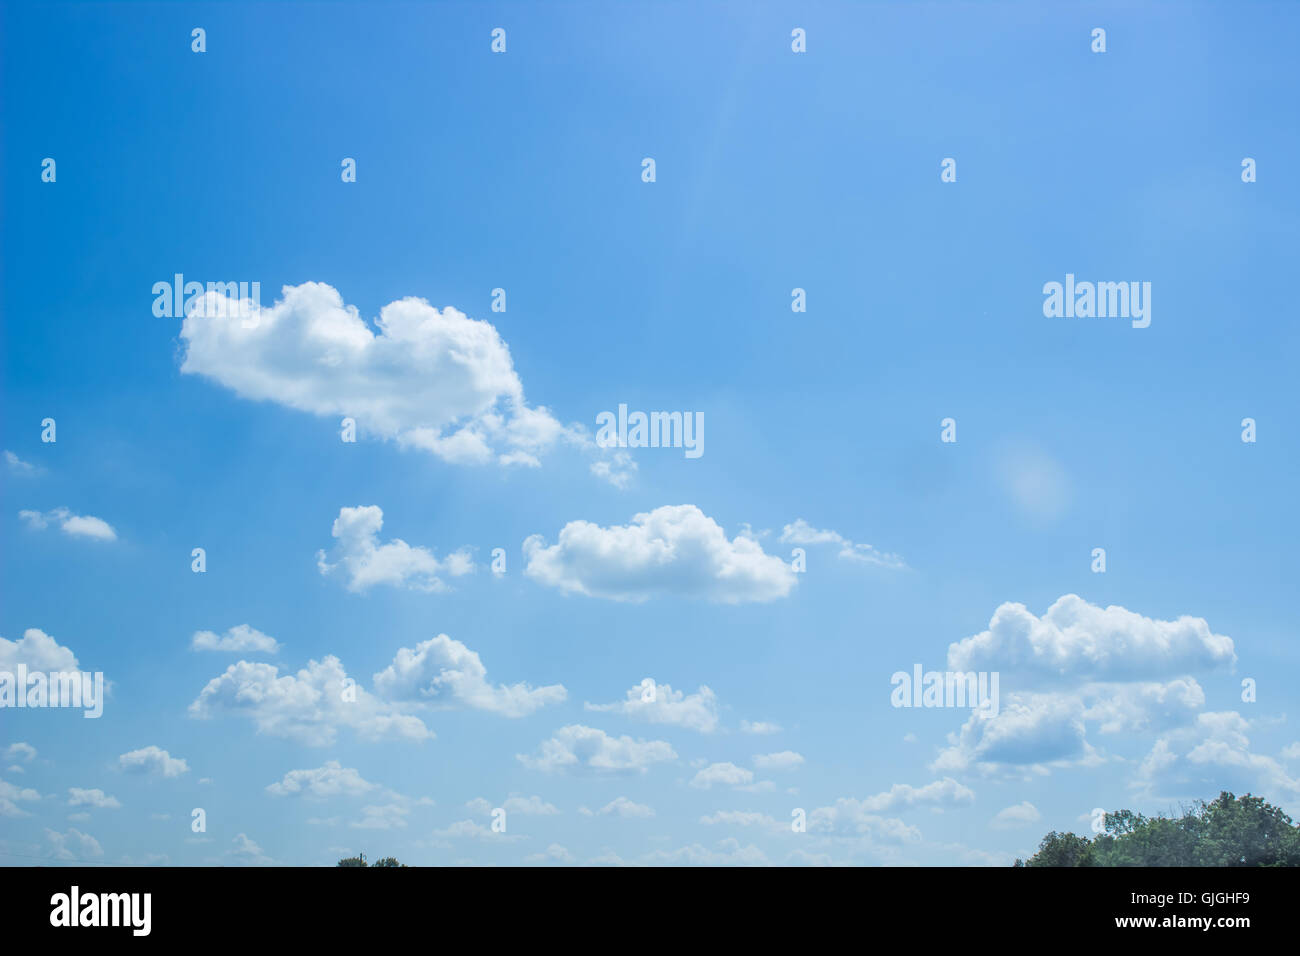 White fluffy clouds in the blue sky Stock Photo